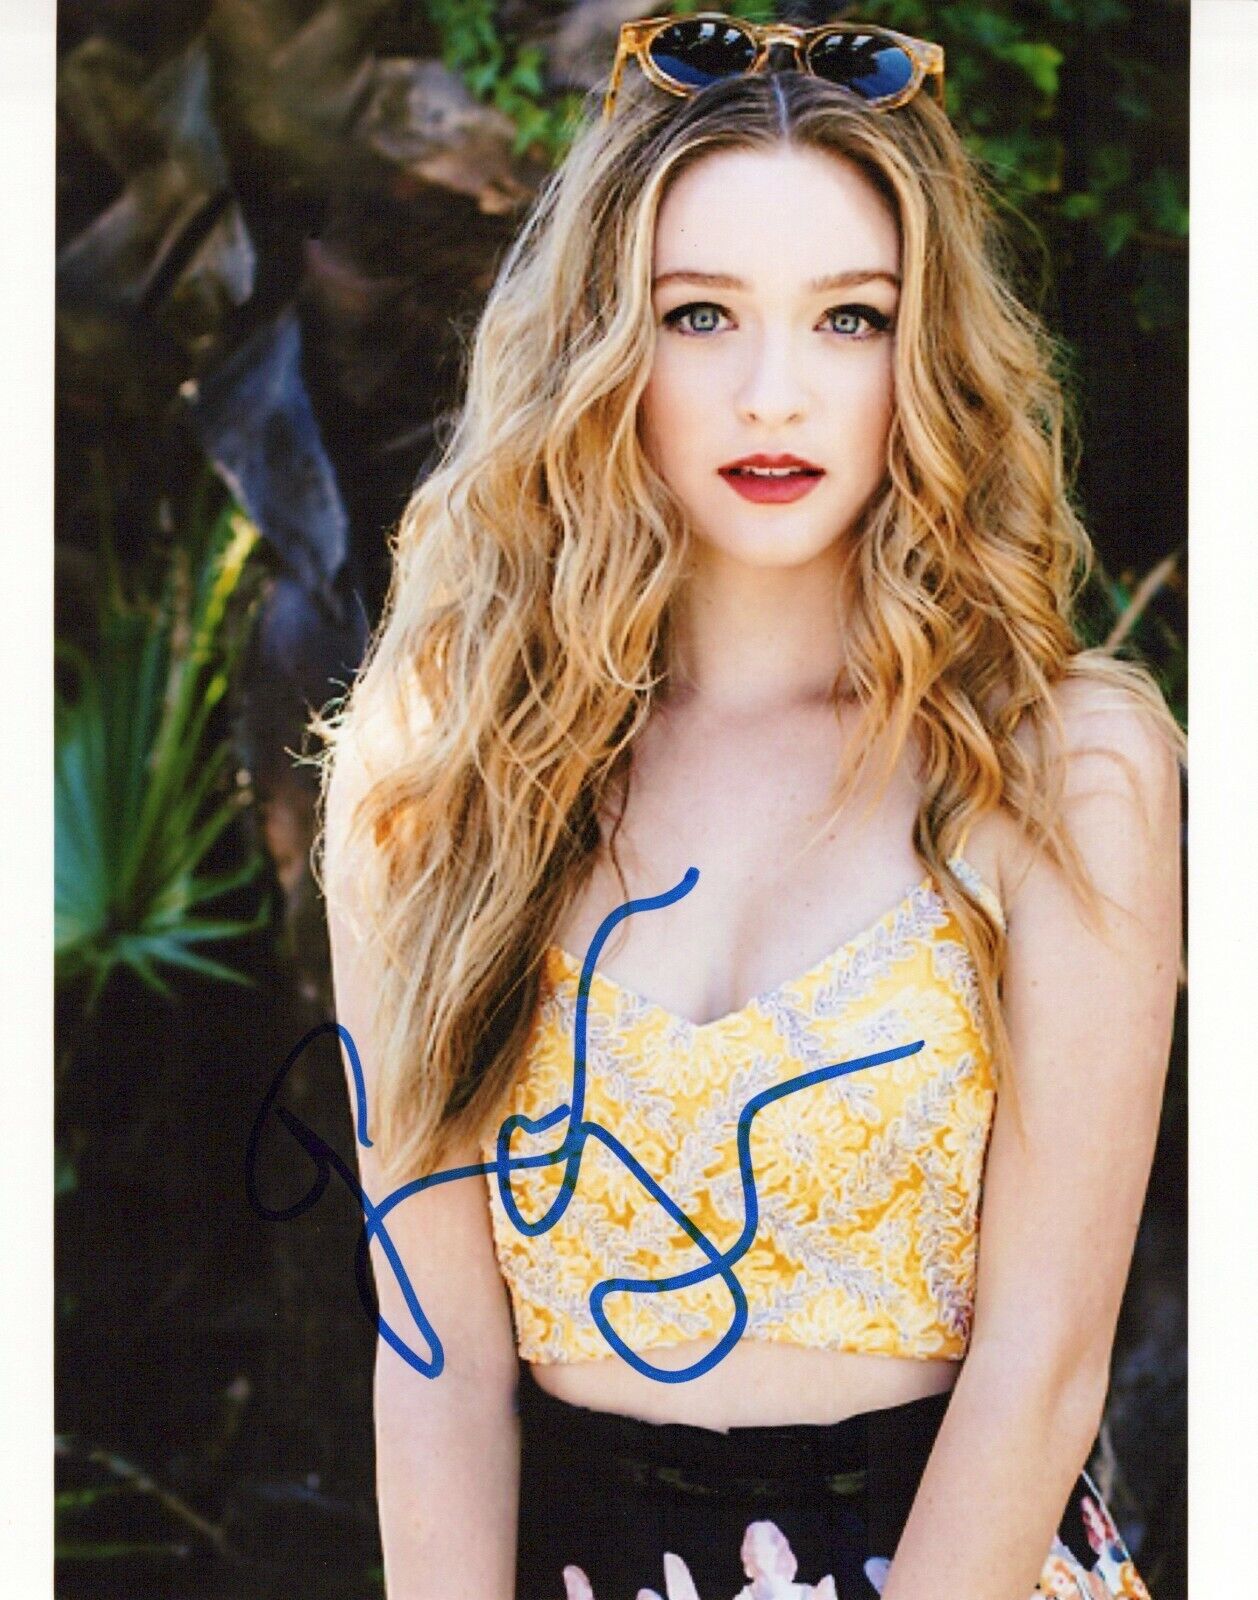 Greer Grammer glamour shot autographed Photo Poster painting signed 8x10 #3